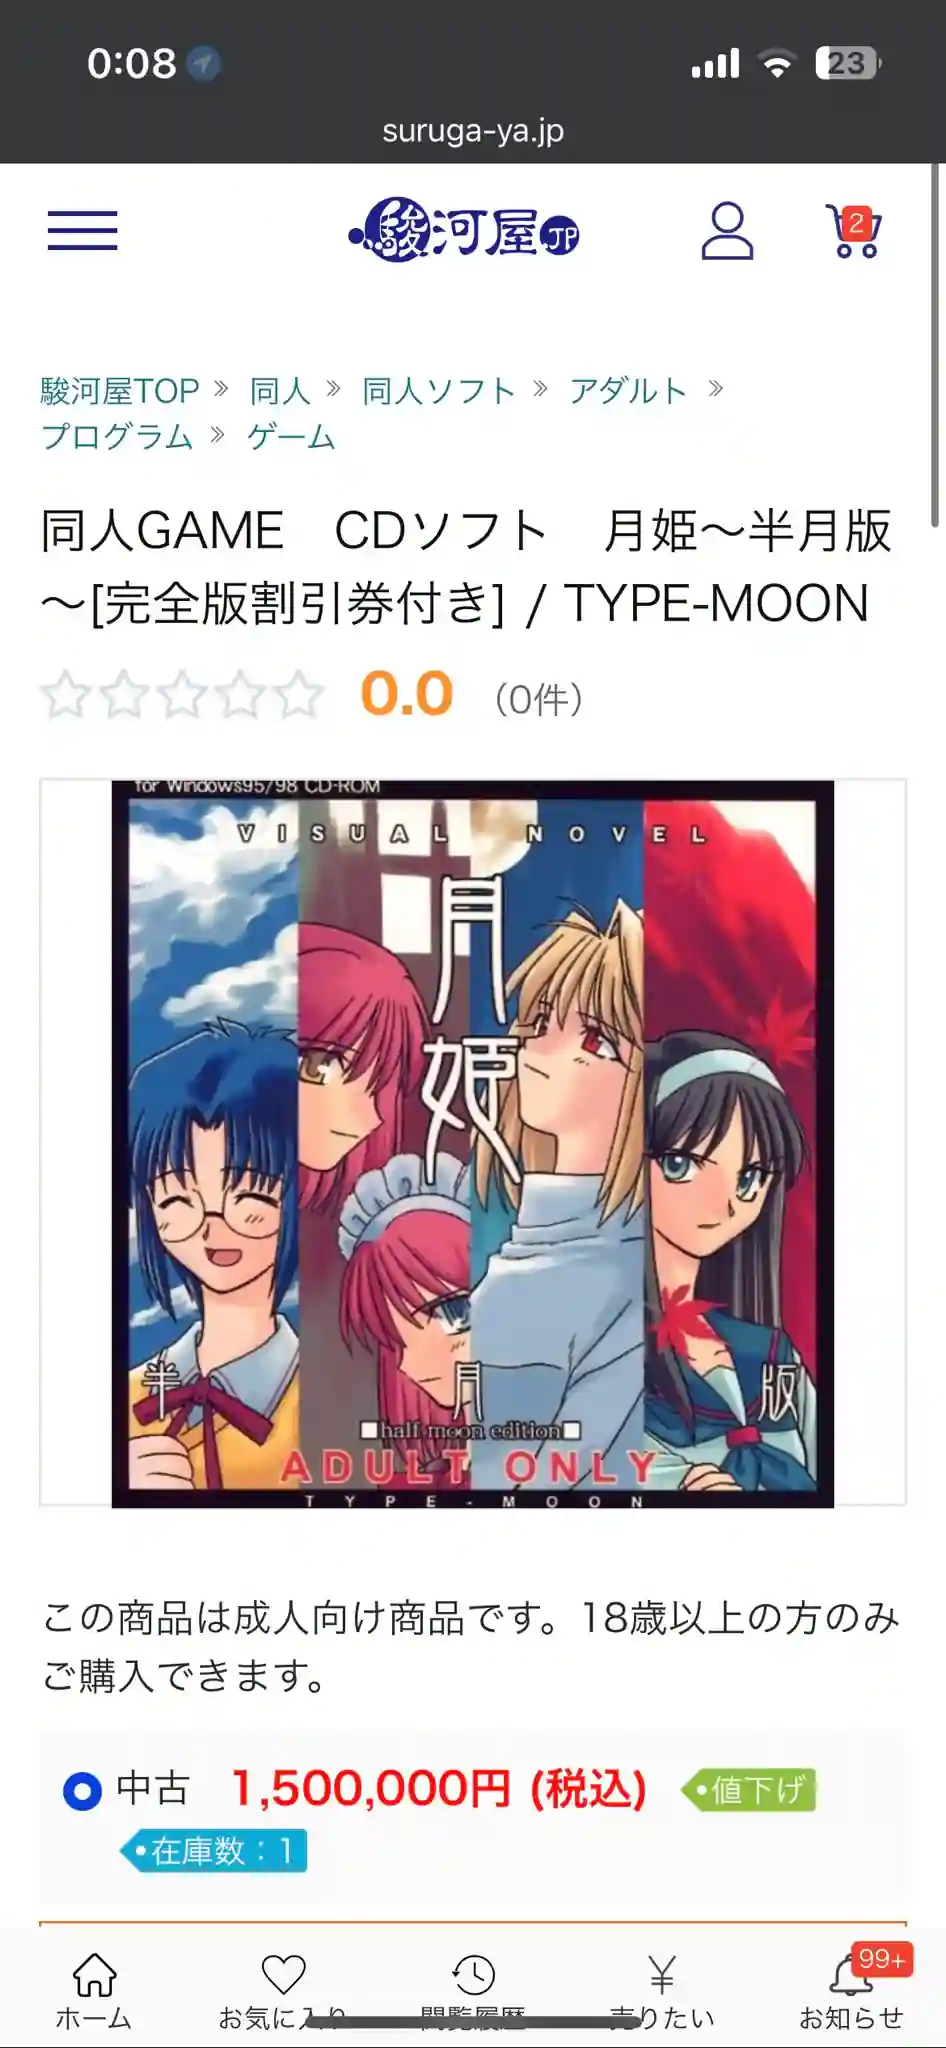 Tsukihime's classic visual novel: Half Moon Edition is selling for 1.5 million yen